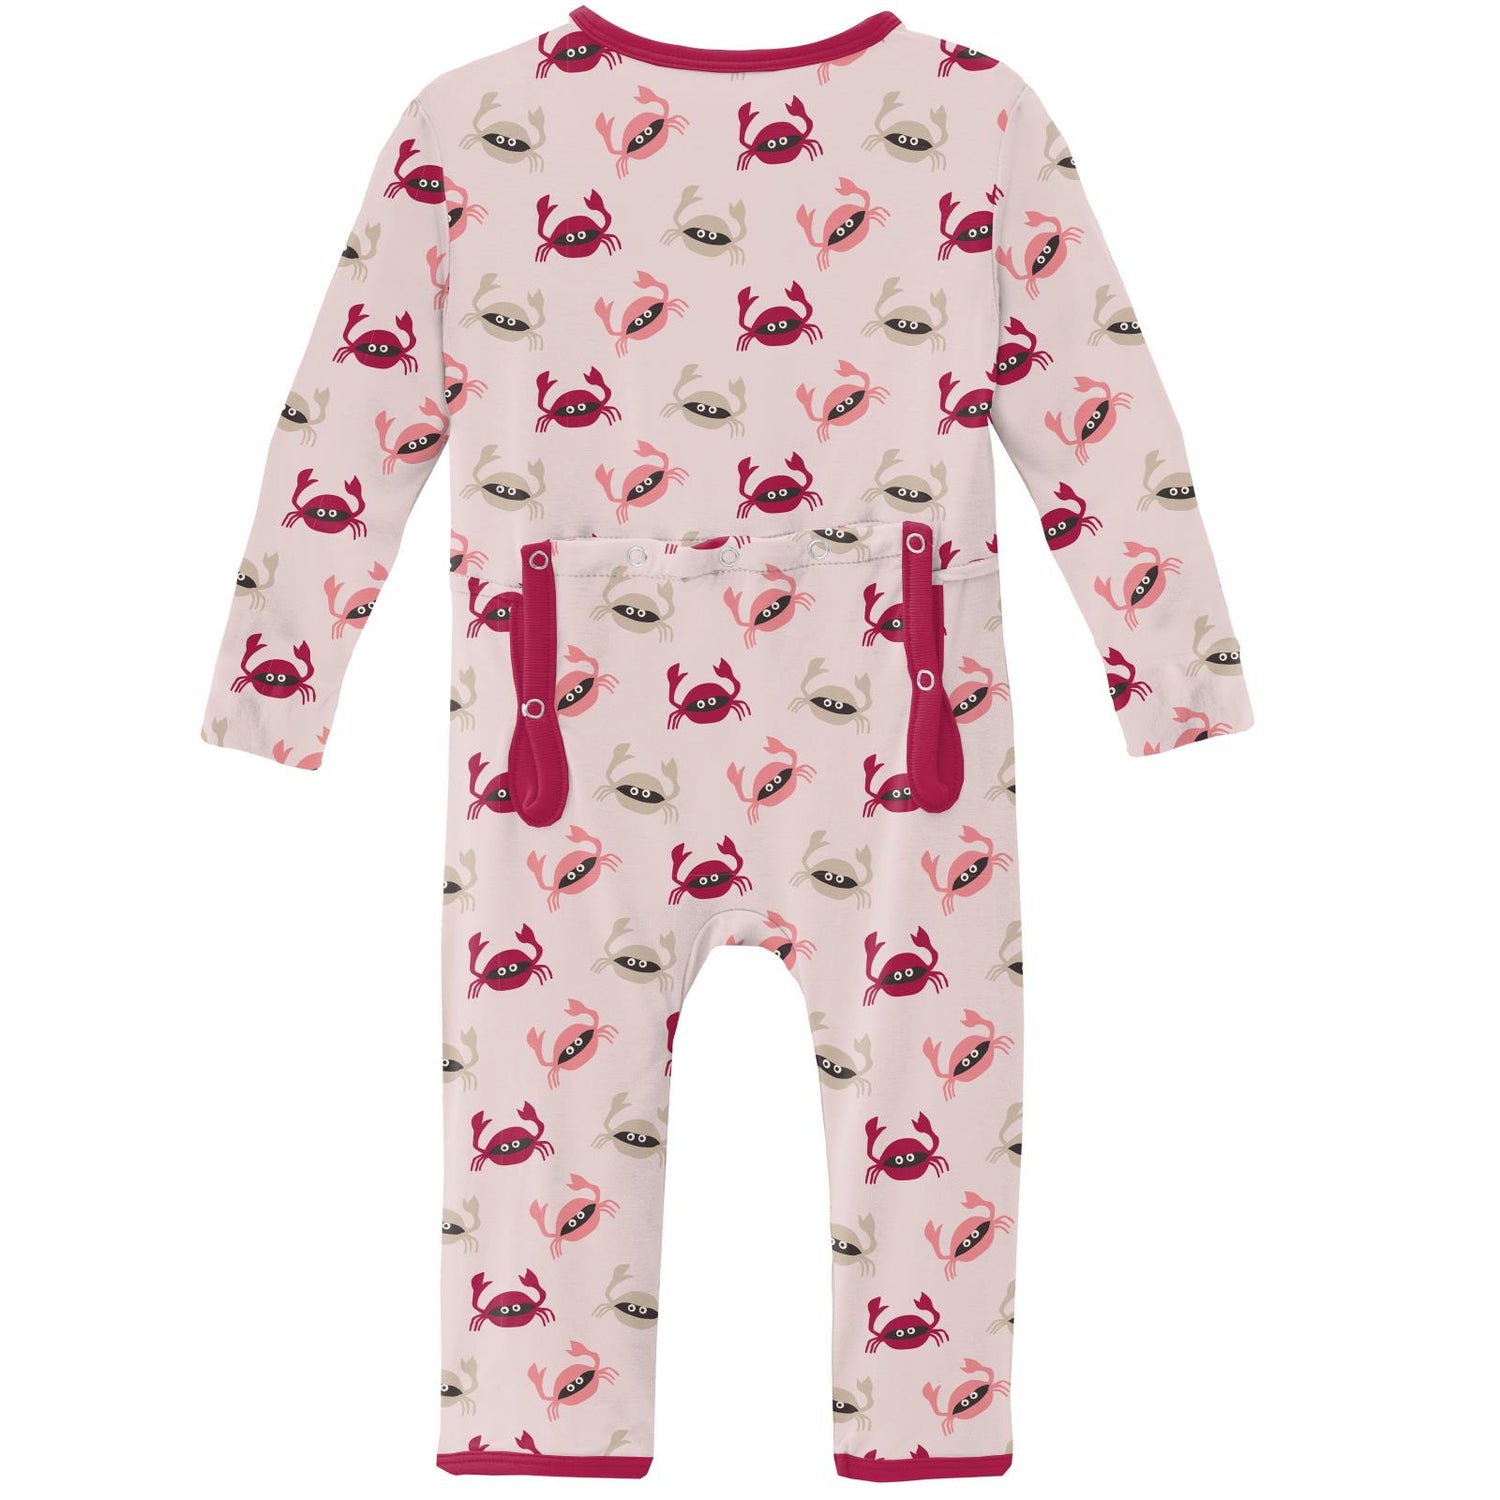 Print Coverall with Zipper in Macaroon Crabs